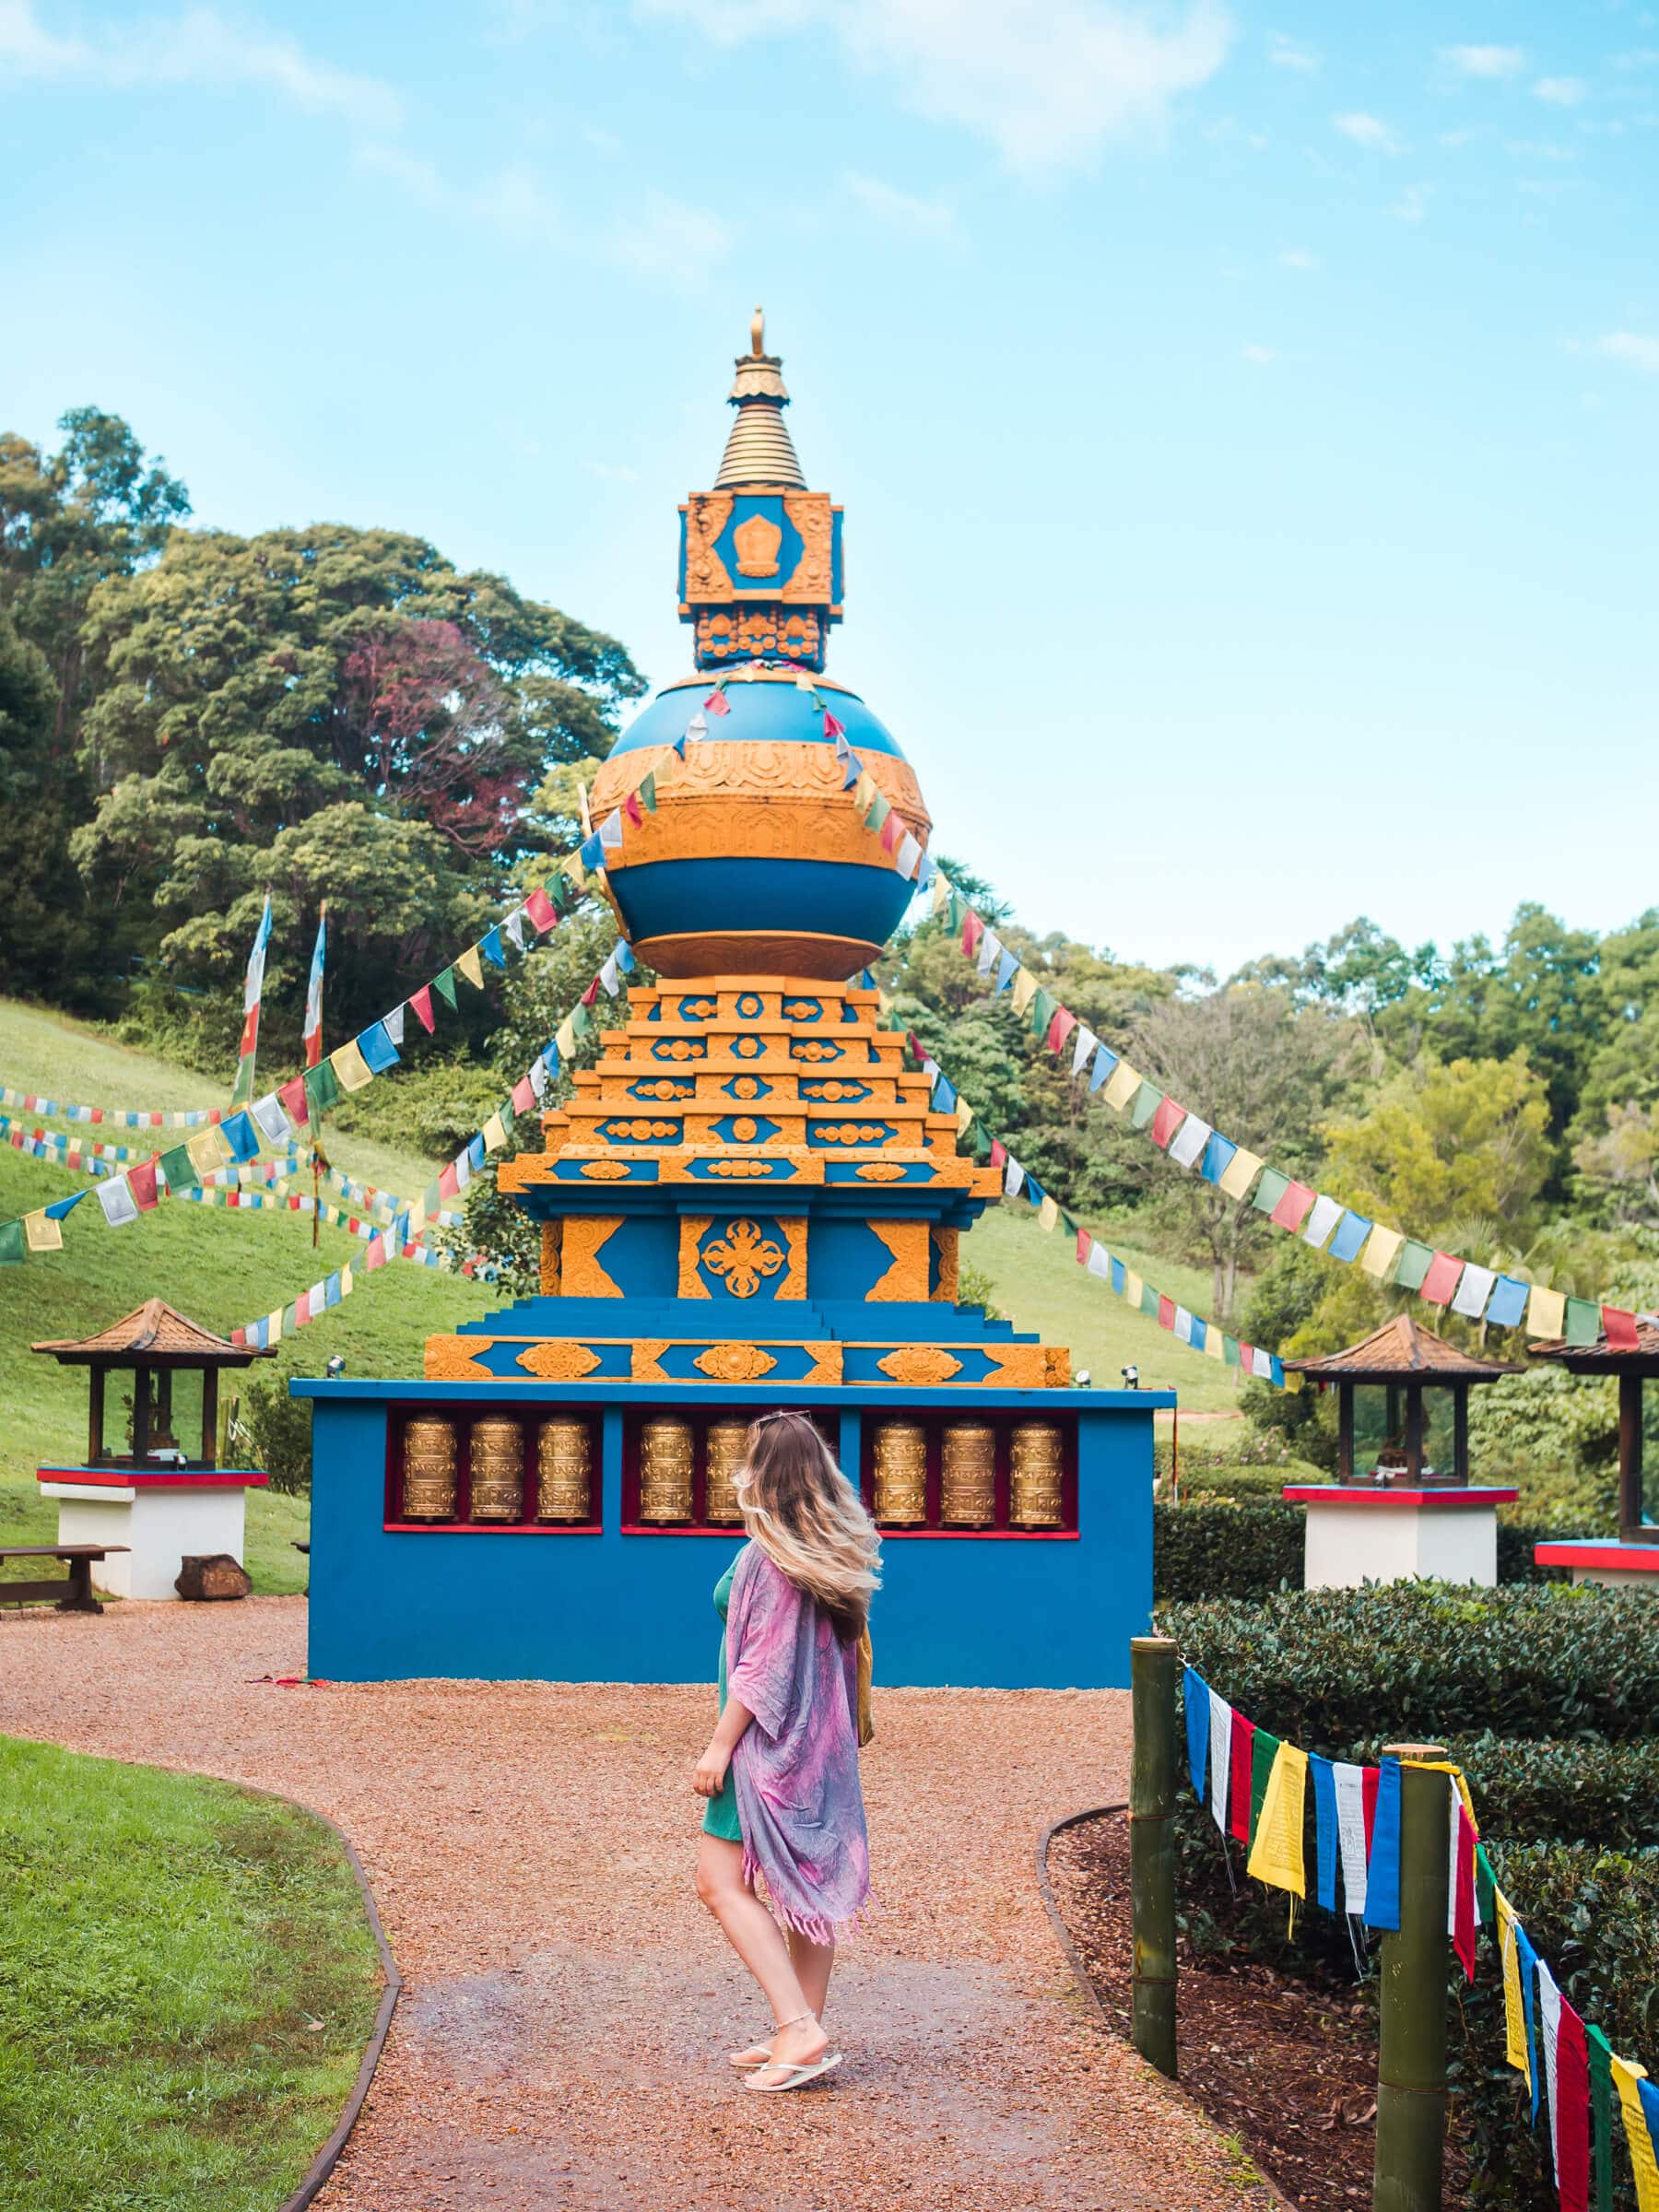 The world peace stupa at the Crystal Castle & shambhala Gardens located in the Byron Bay hinterlands